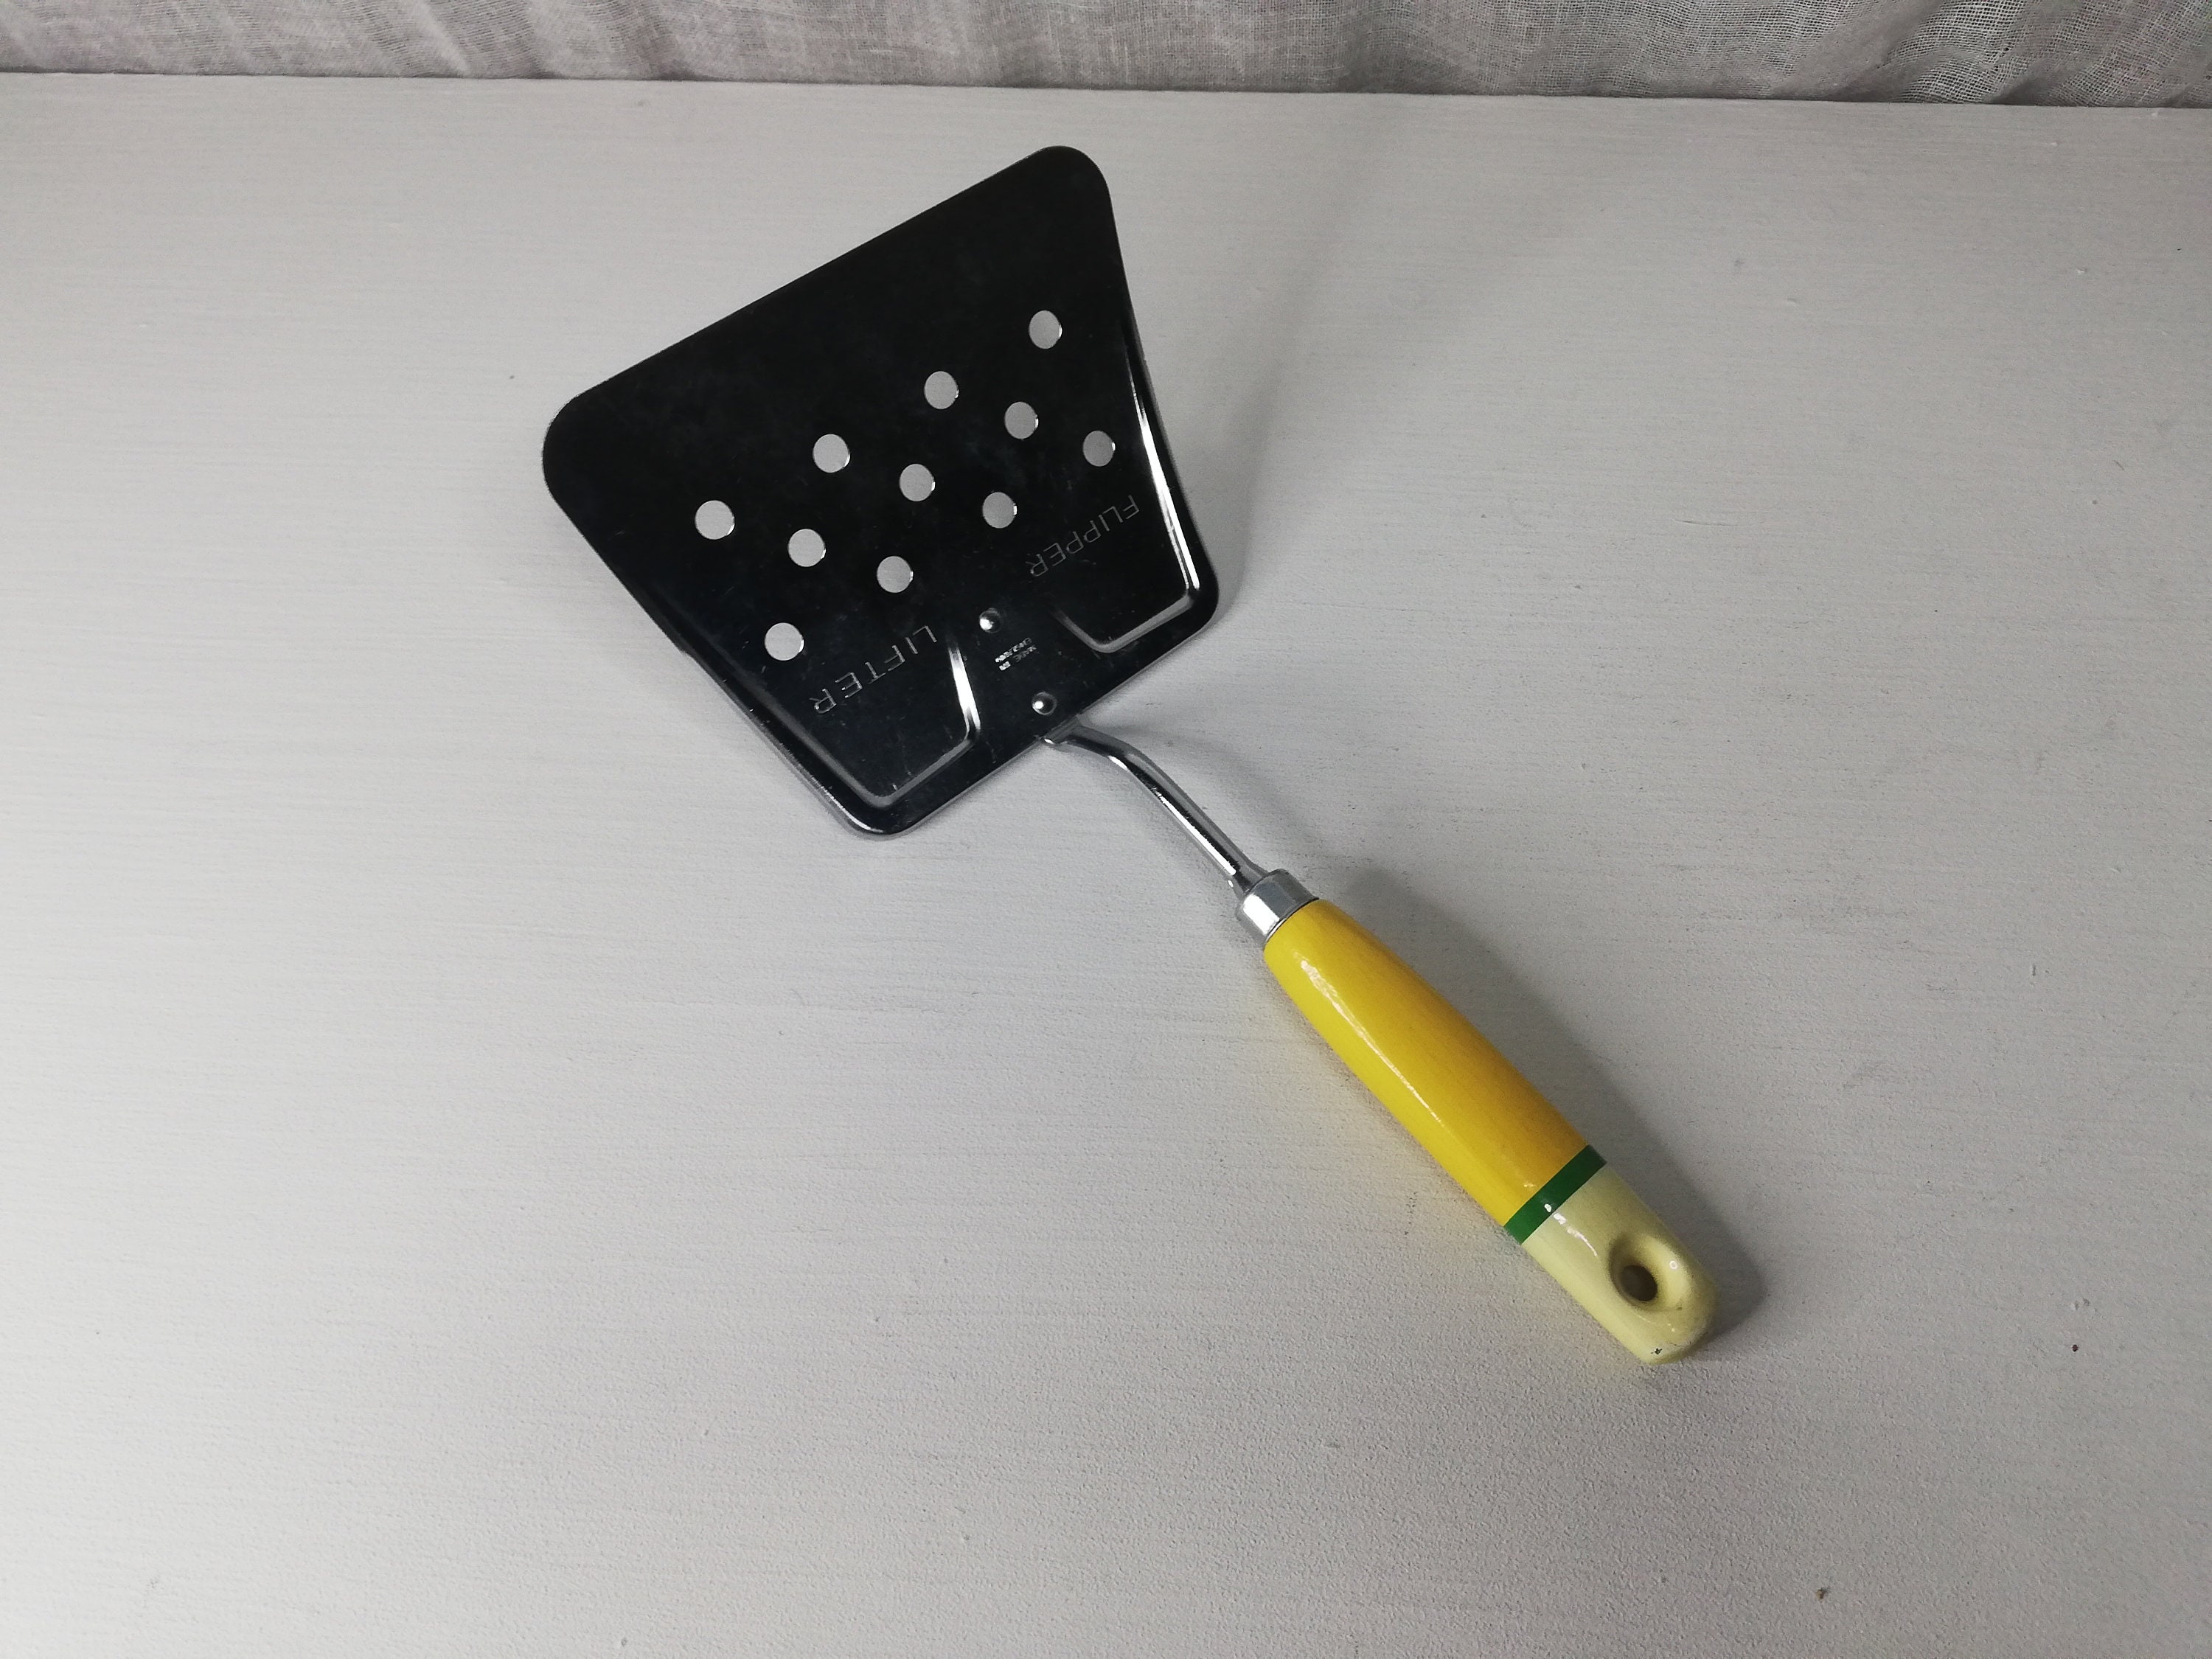 GrillToolZ: Spatula - Burger Flipper, Grilling Tool, Grate Lifter, Bottle Opener - Made in USA